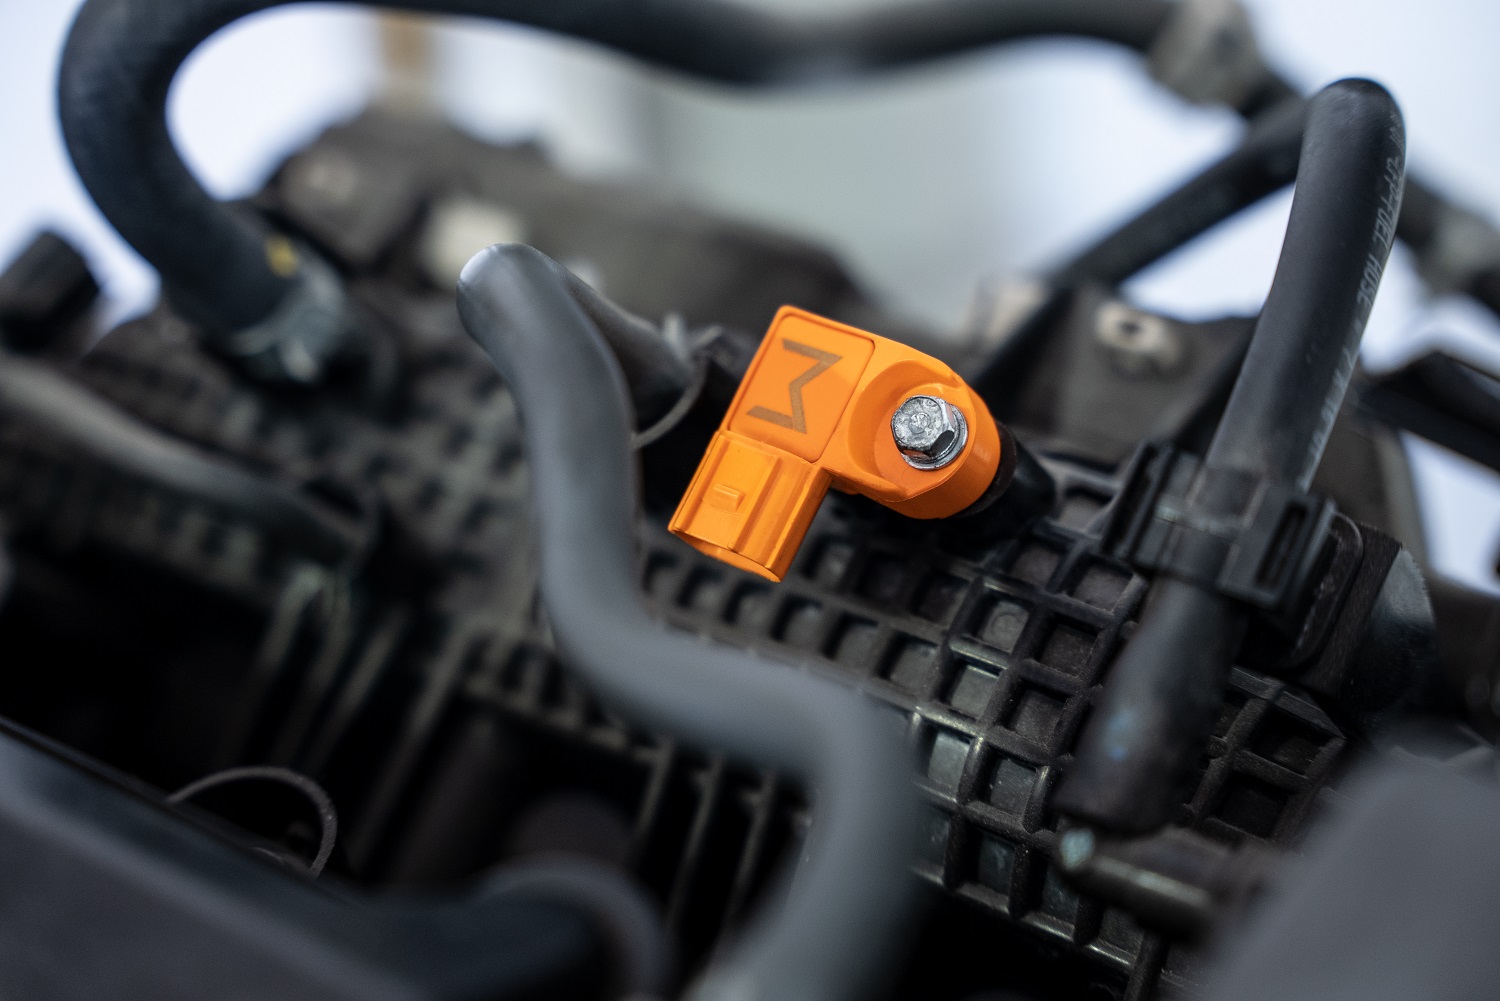 The 27WON MAP Sensor is a direct bolt-on for many popular Honda engines